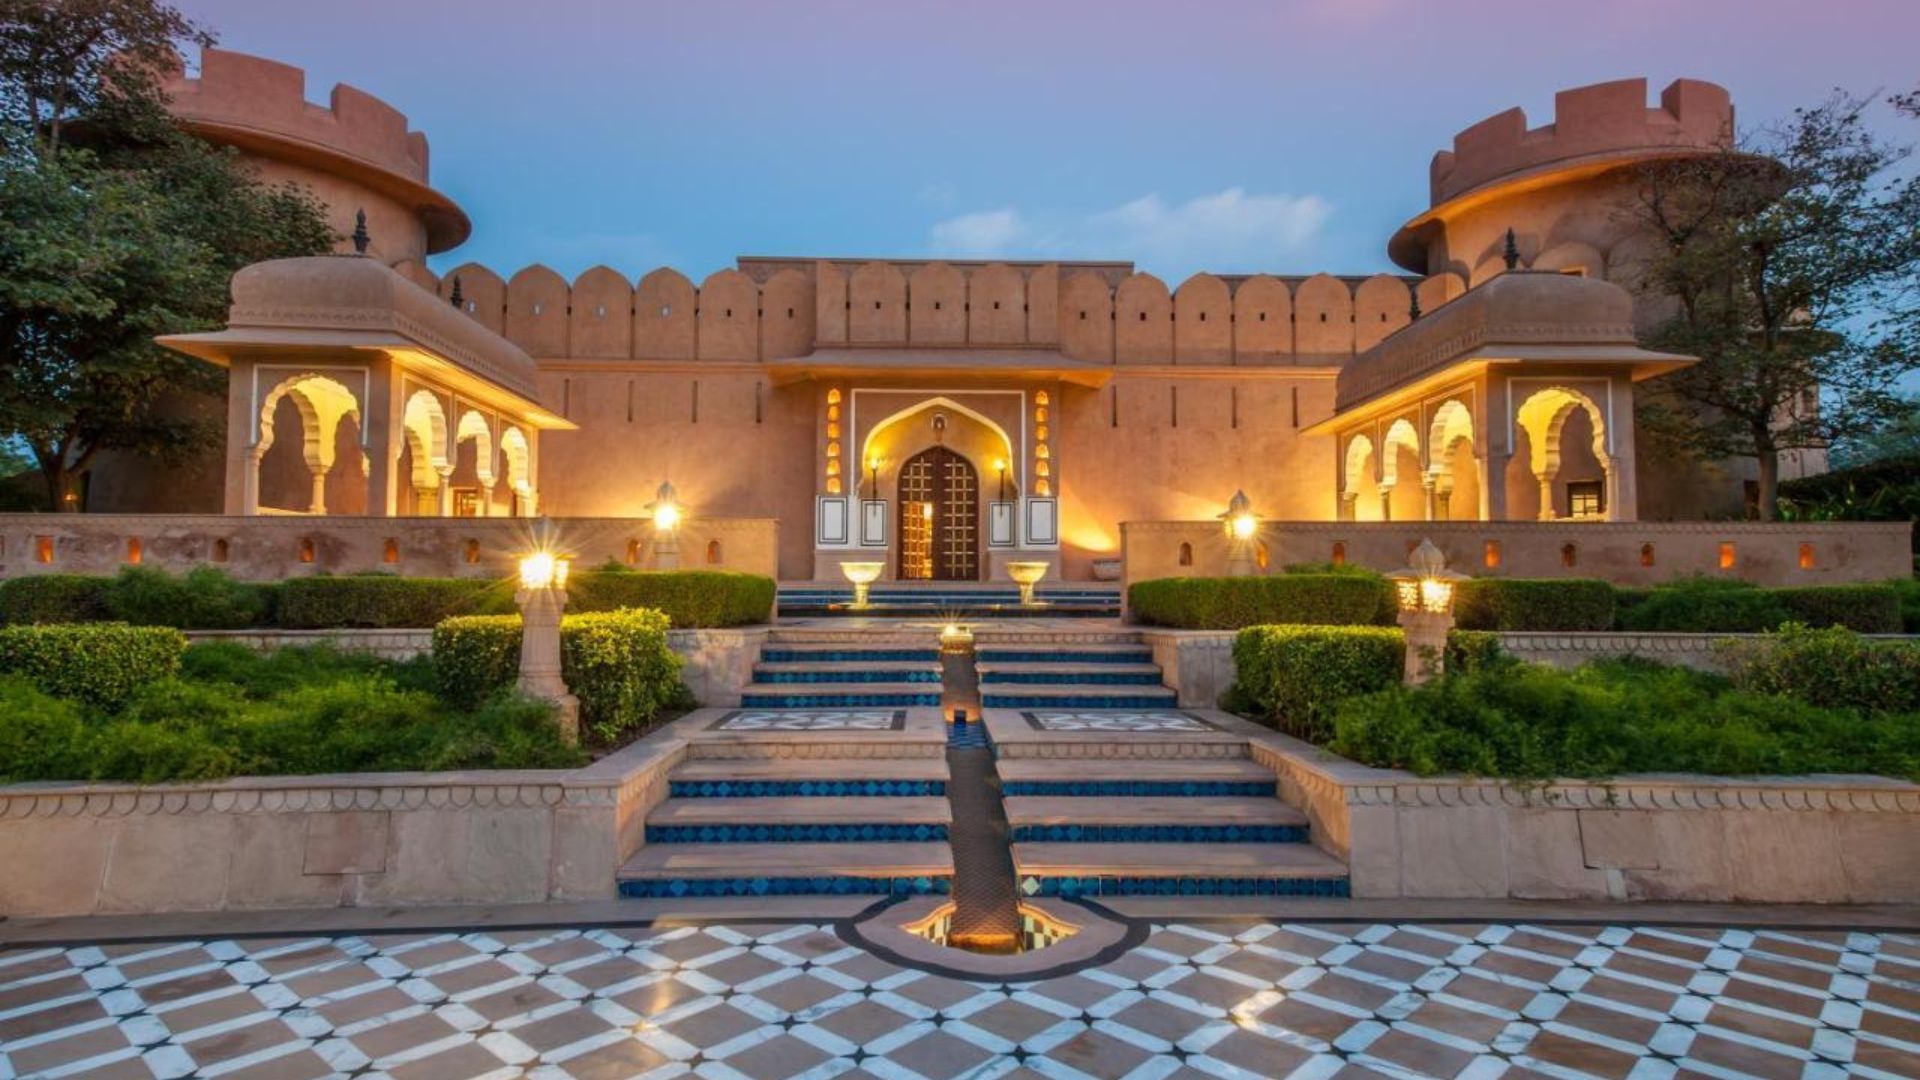 The Best Hotels In Jaipur, India That Give You A Taste Of Royalty